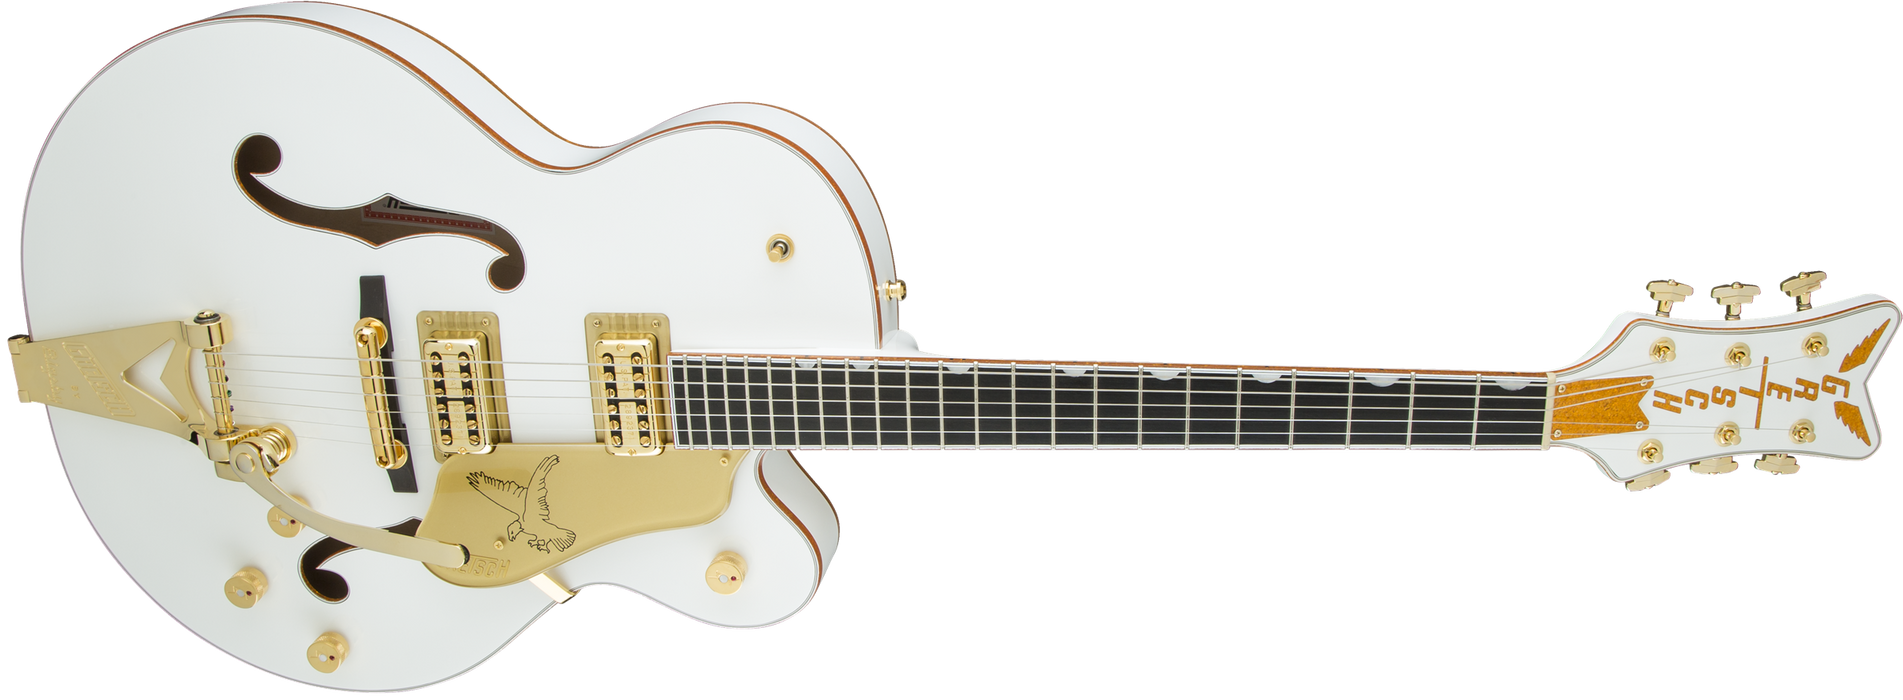 Gretsch G6136T-WHT Players Edition Falcon with String-Thru Bigsby Filter'Tron Pickups White Electric Guitar